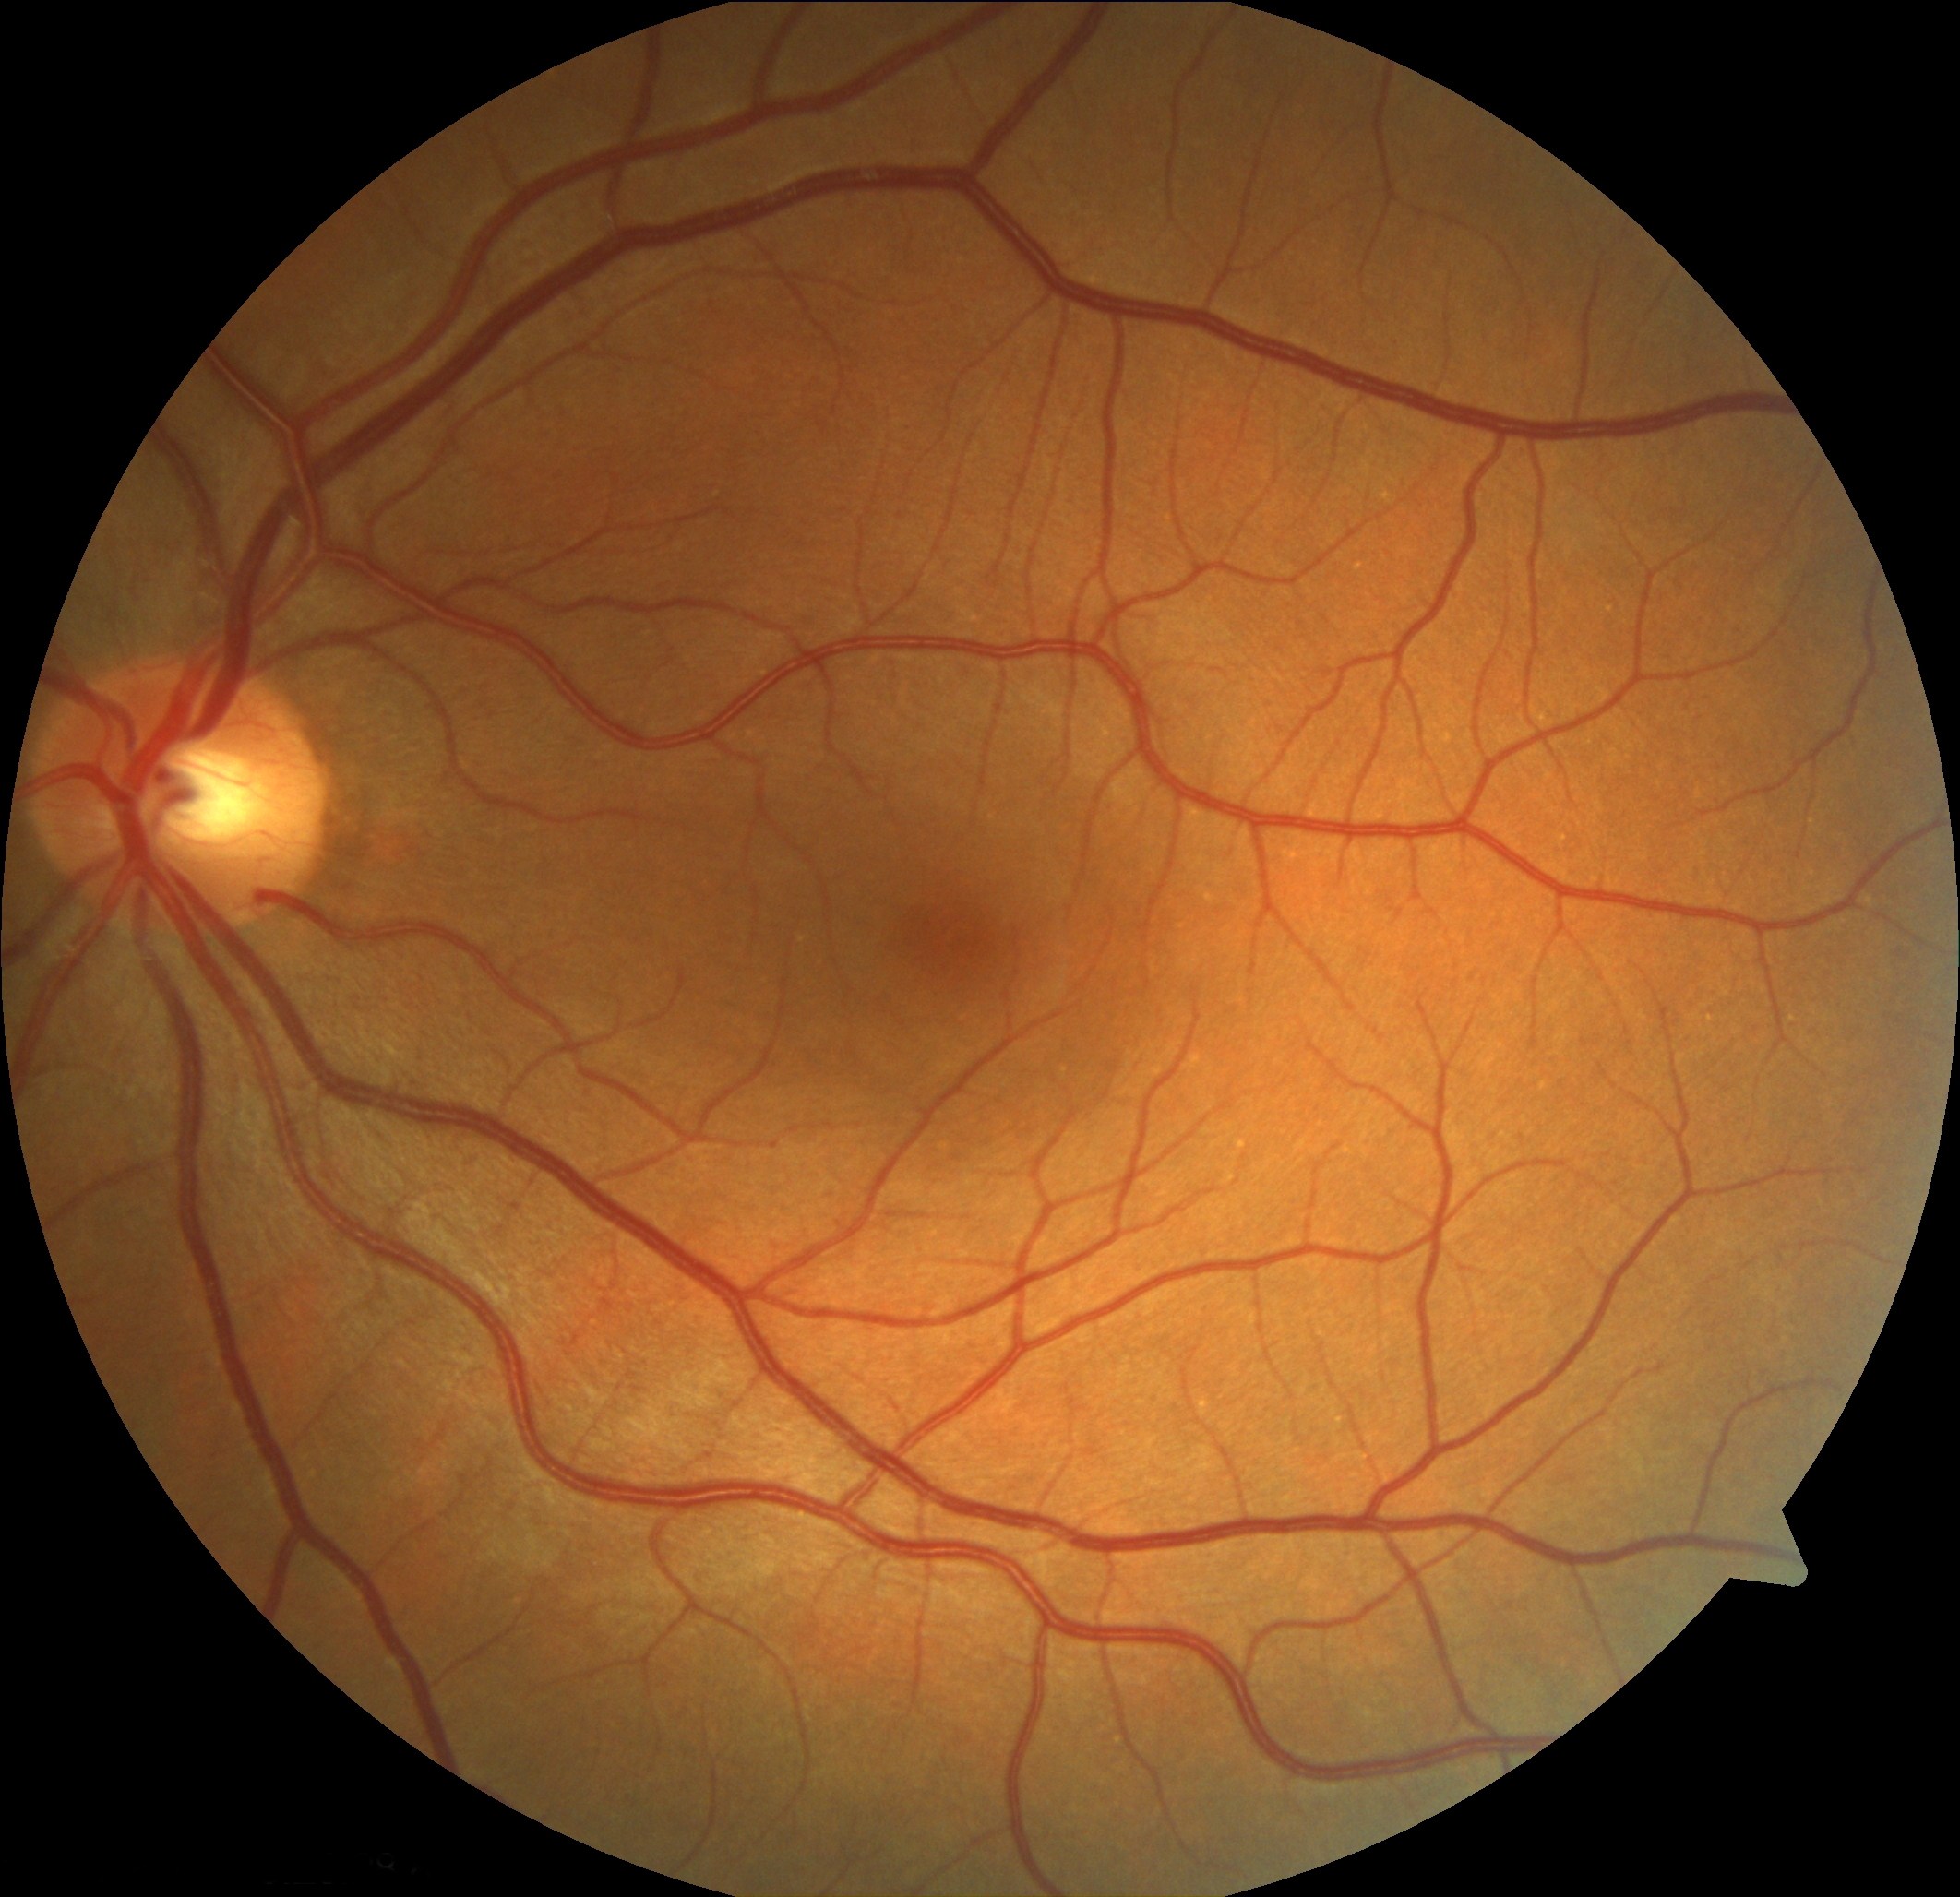 Near infra-red reflectance shows a dark, wedge-shaped lesion pointing towards the fovea, corresponding to the retinal lesion seen on fundus exam.